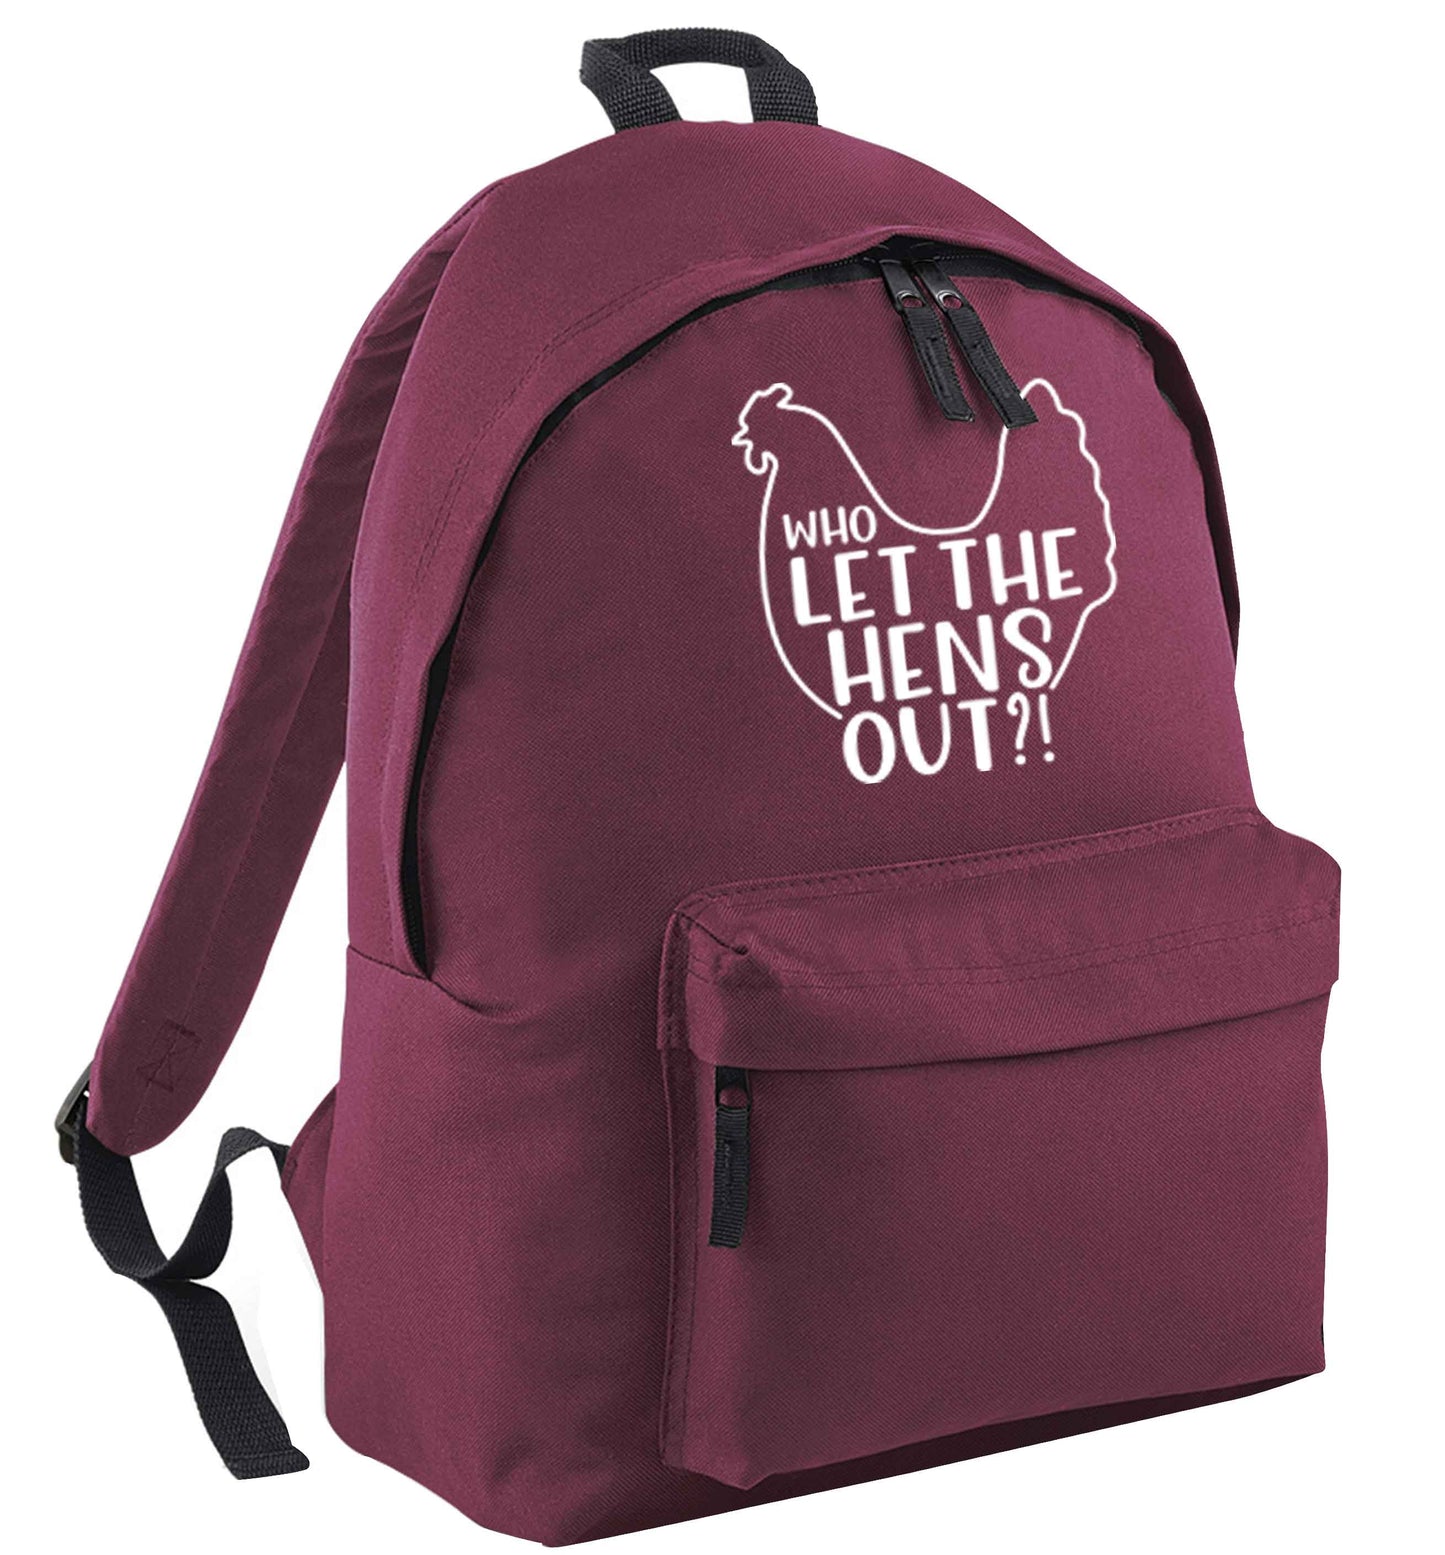 Who let the hens out maroon adults backpack